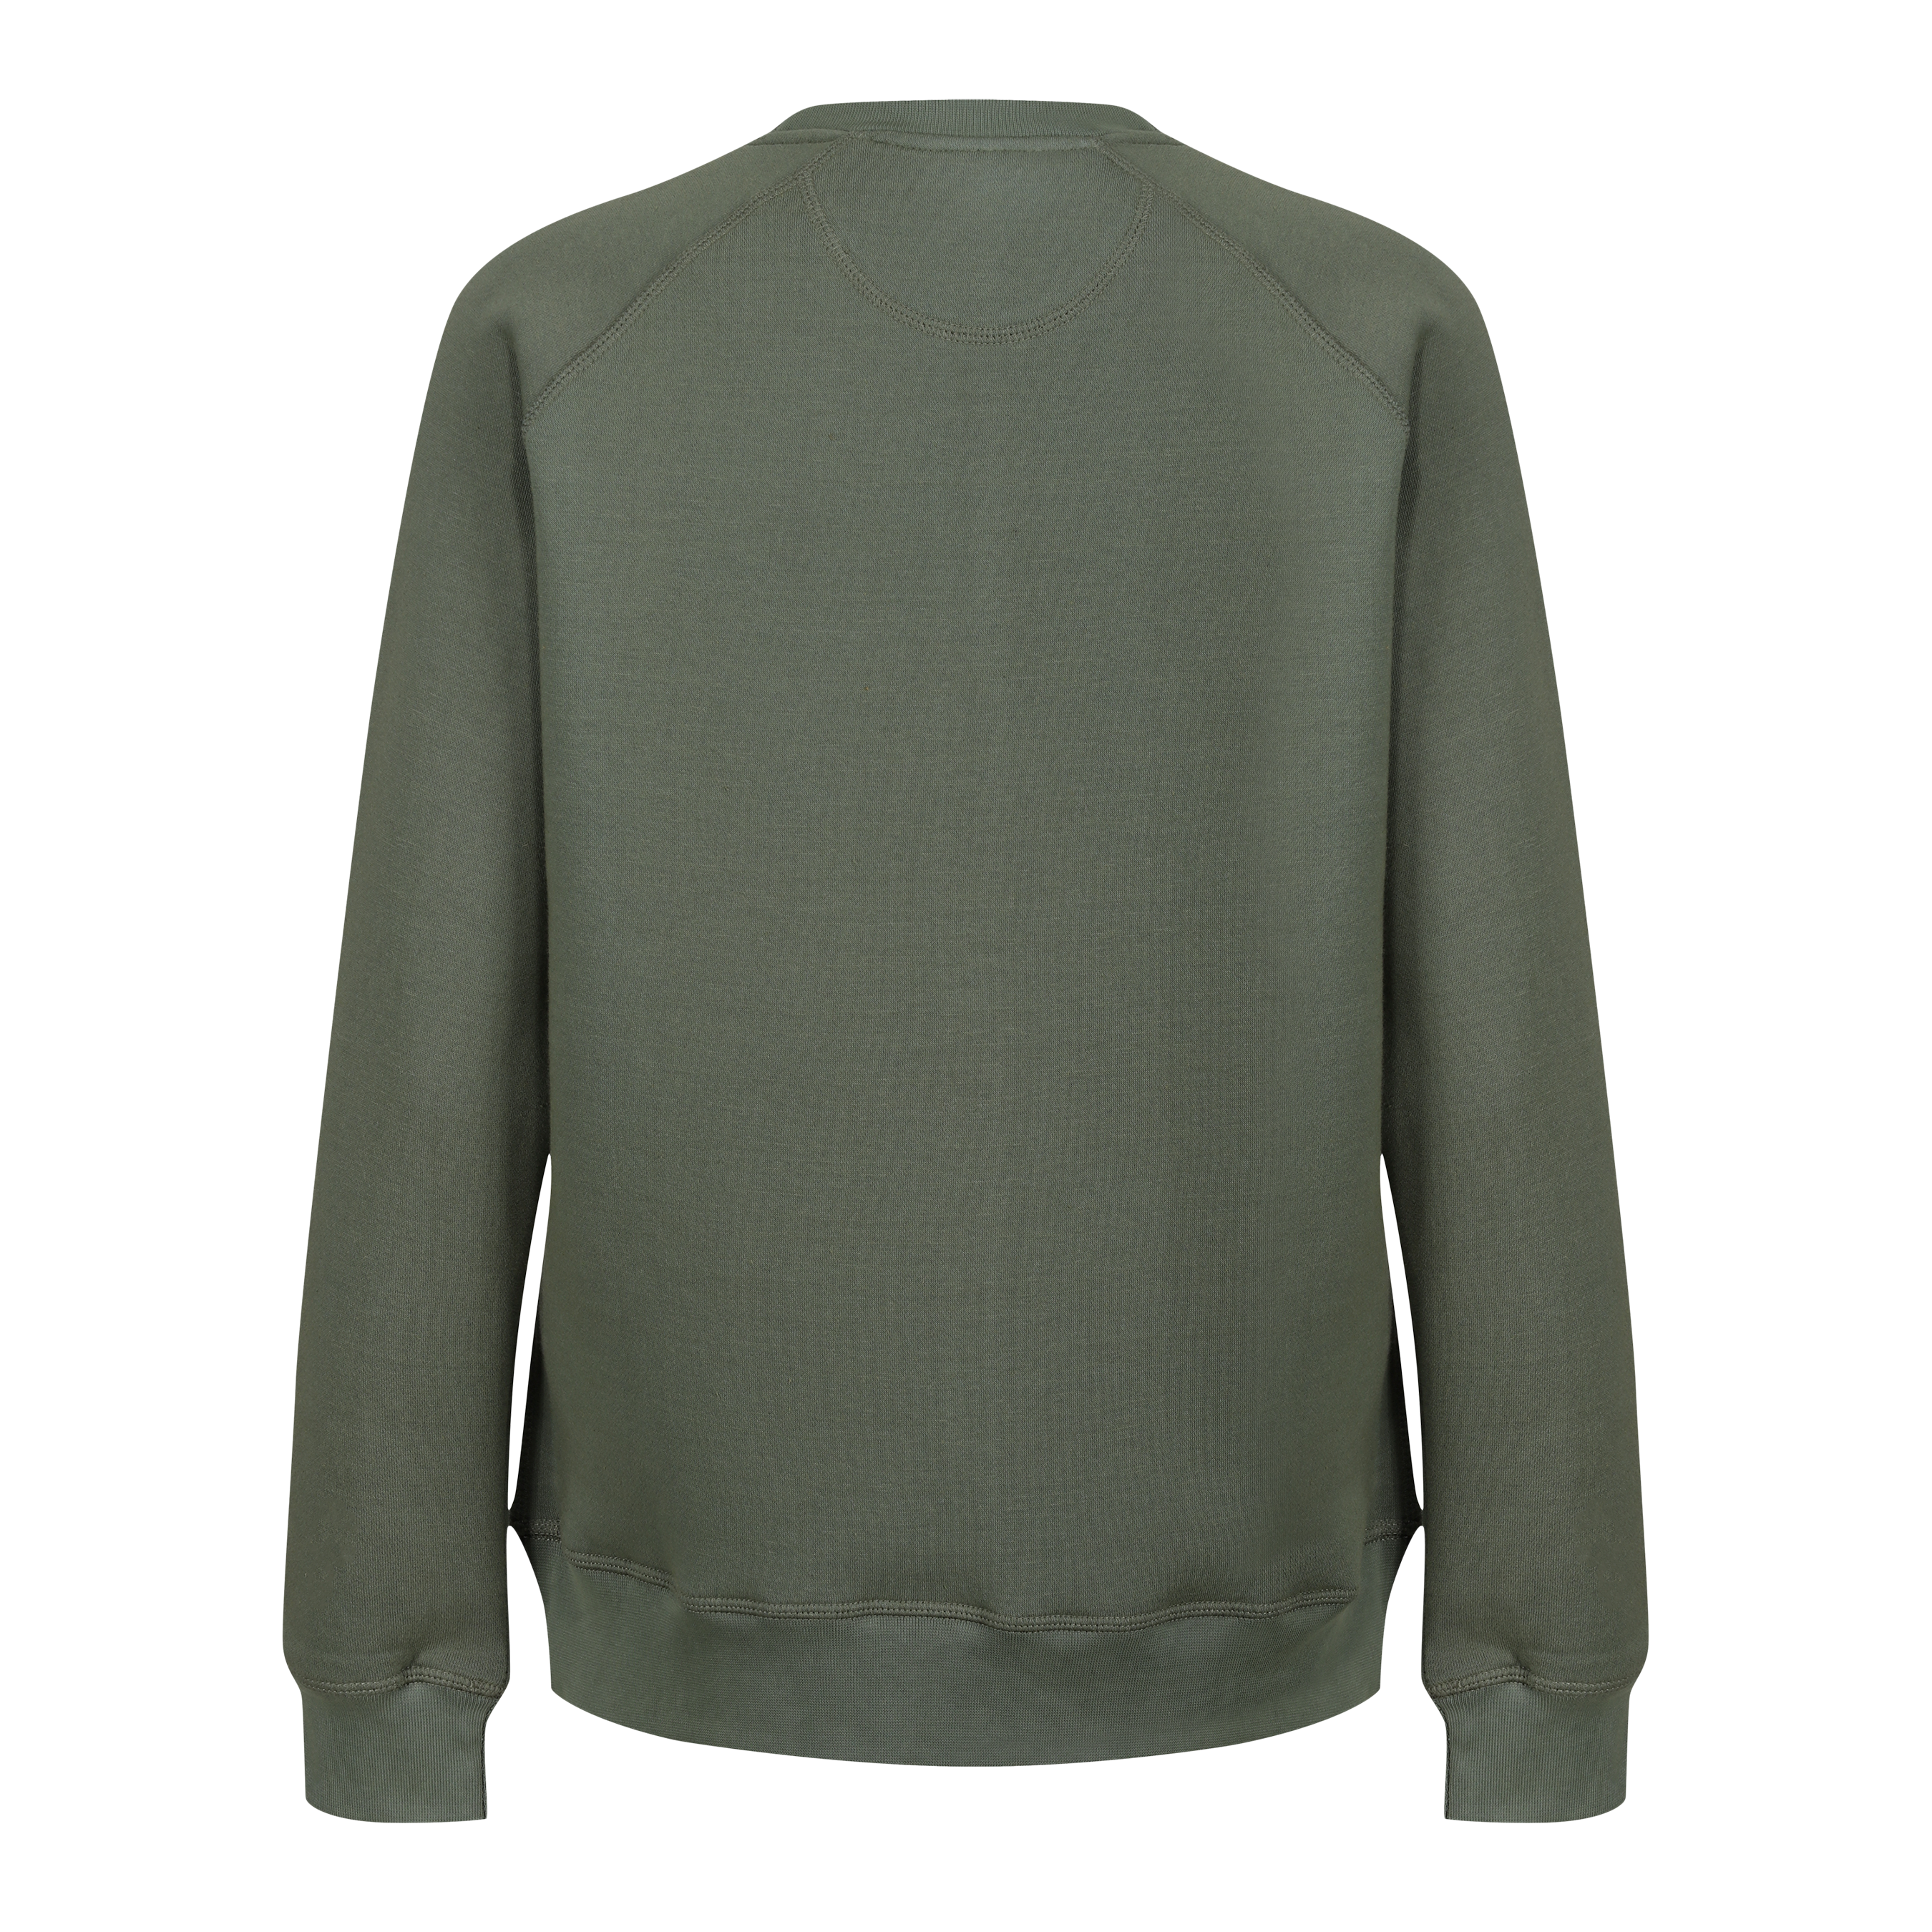 The back of an olive green colour lady sweatshirt with Moto Girl 3D logo